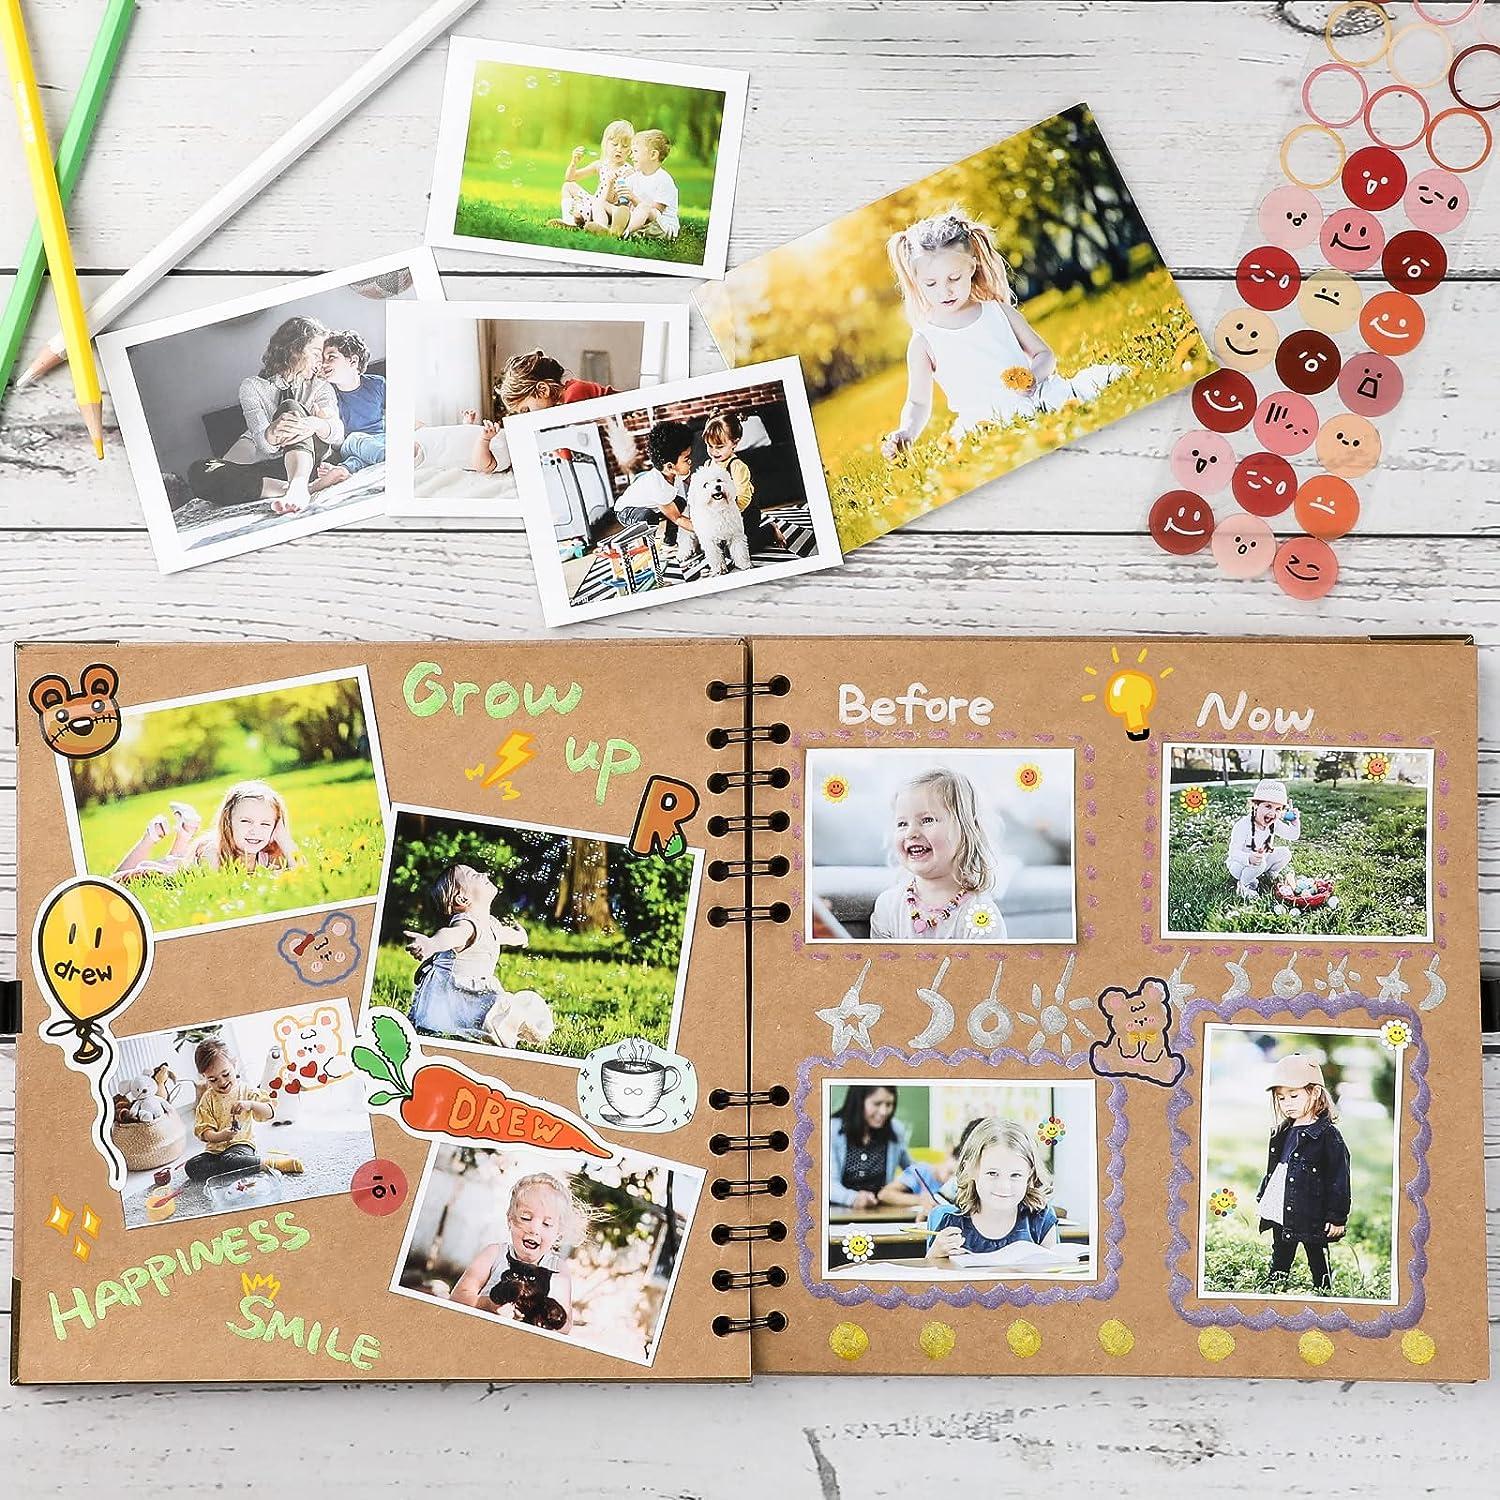 DIY Photo Album Scrapbook 8.5x11 Inch Hardcover 3 Ring Black Scrapbook  Paper 60 Pages Many Scrapbooking Supplies Scrapbooking Kit forBaby, Family